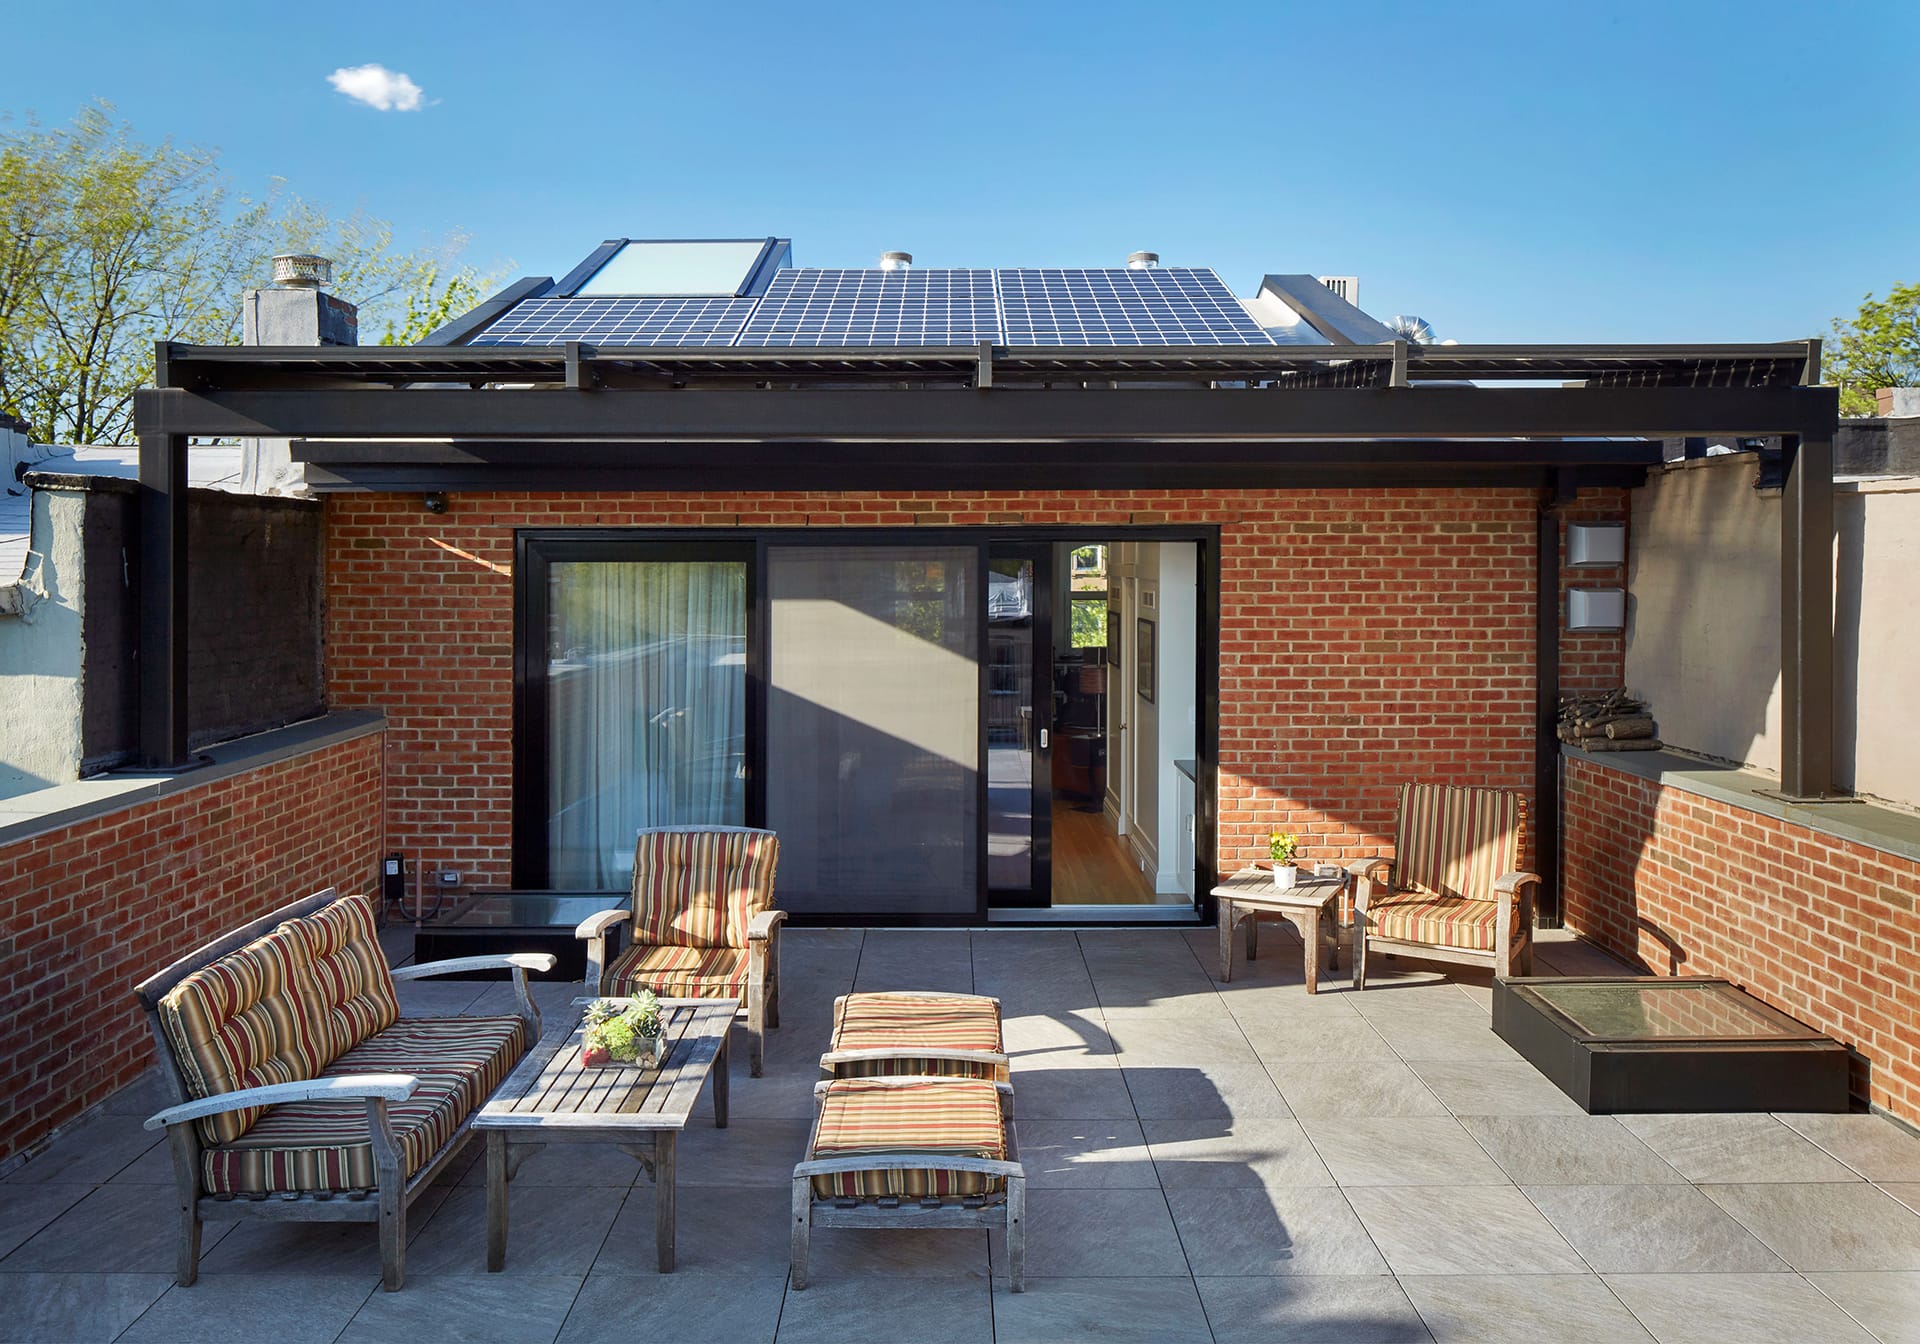 Penthouse of a Carroll Gardens townhouse with bluestone pavers, striped outdoor furniture, sliding glass doors, and a rooftop solar array.